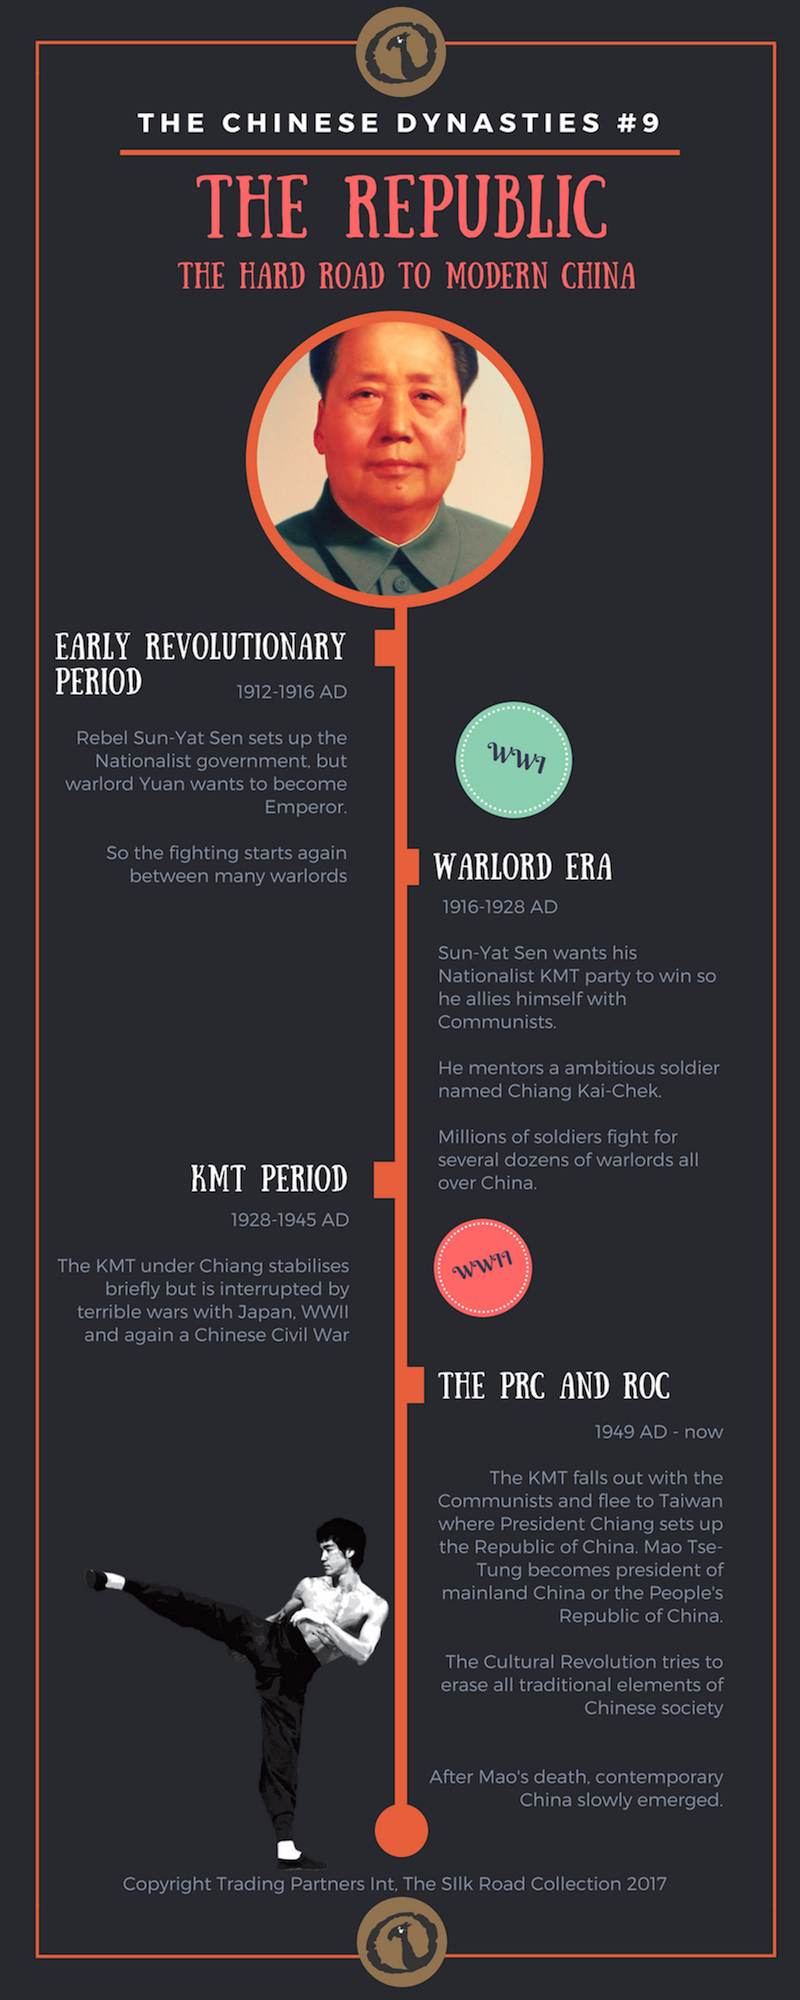 Timeline image of The Chinese Dynasties: The Republic - The hard road to modern China